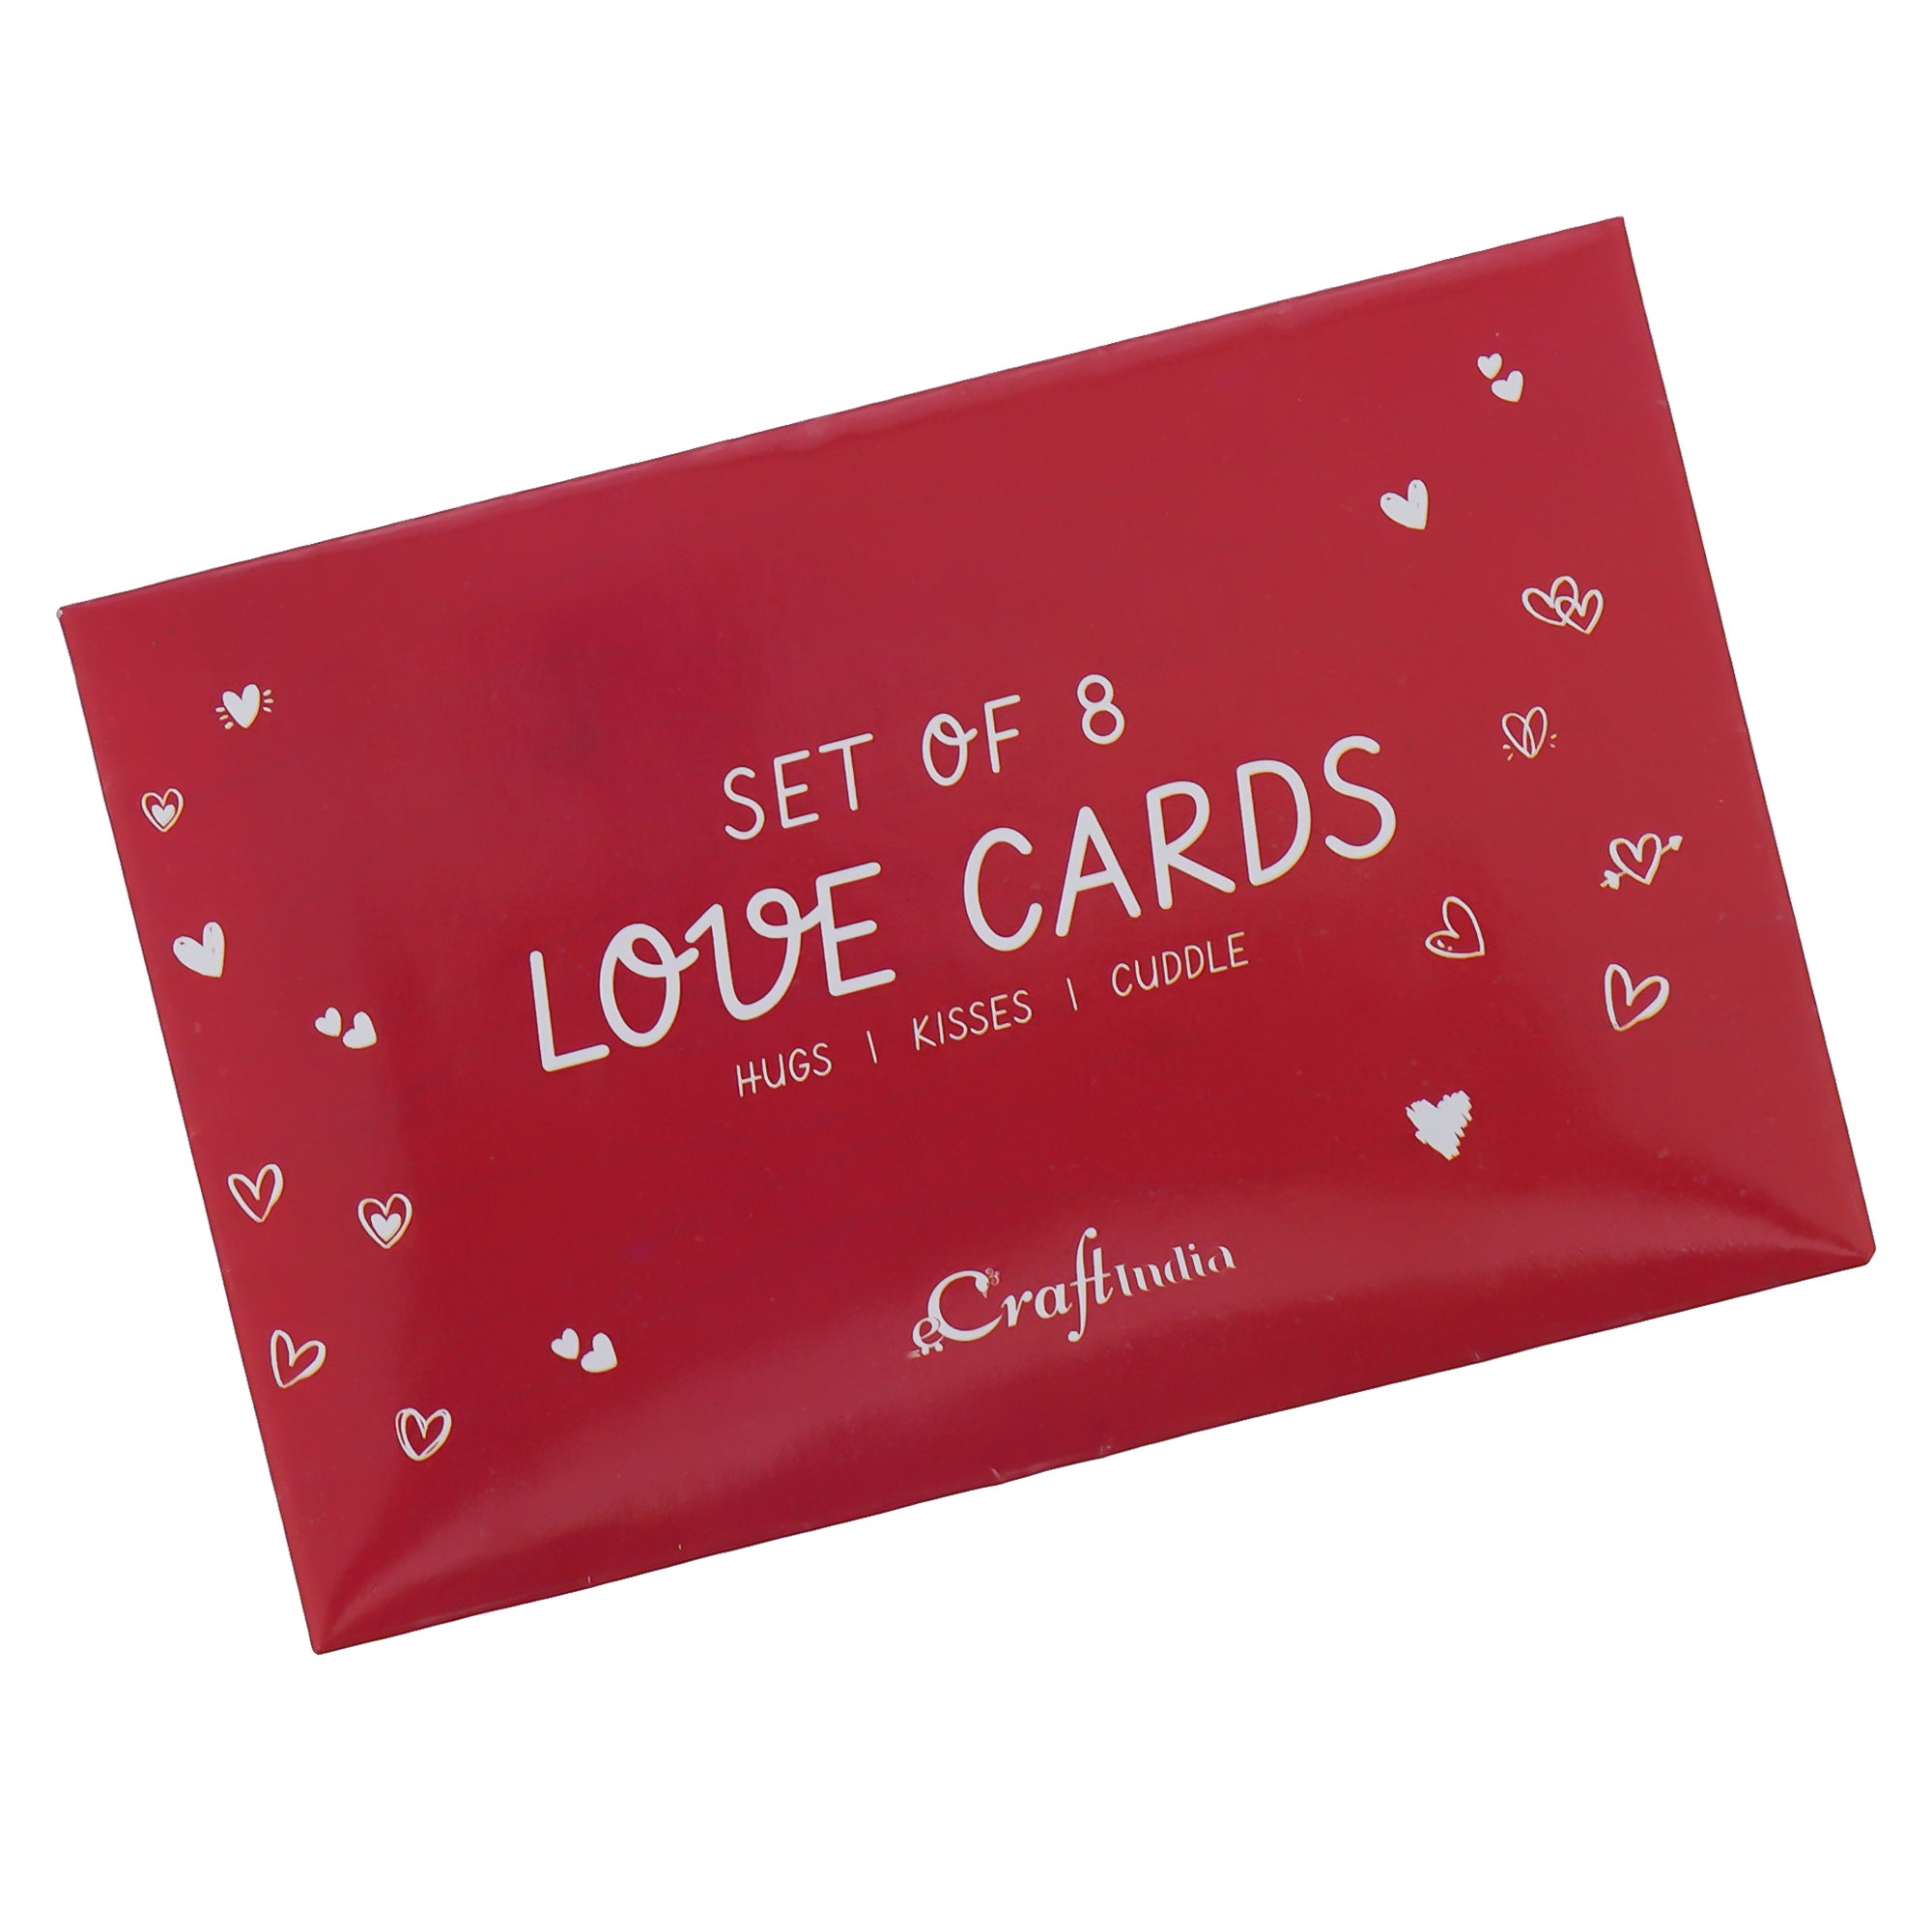 Valentine Combo of Pack of 8 Love Gift Cards, Golden Rose Gift Set, Hands Showcasing Red Heart Gift Set 7